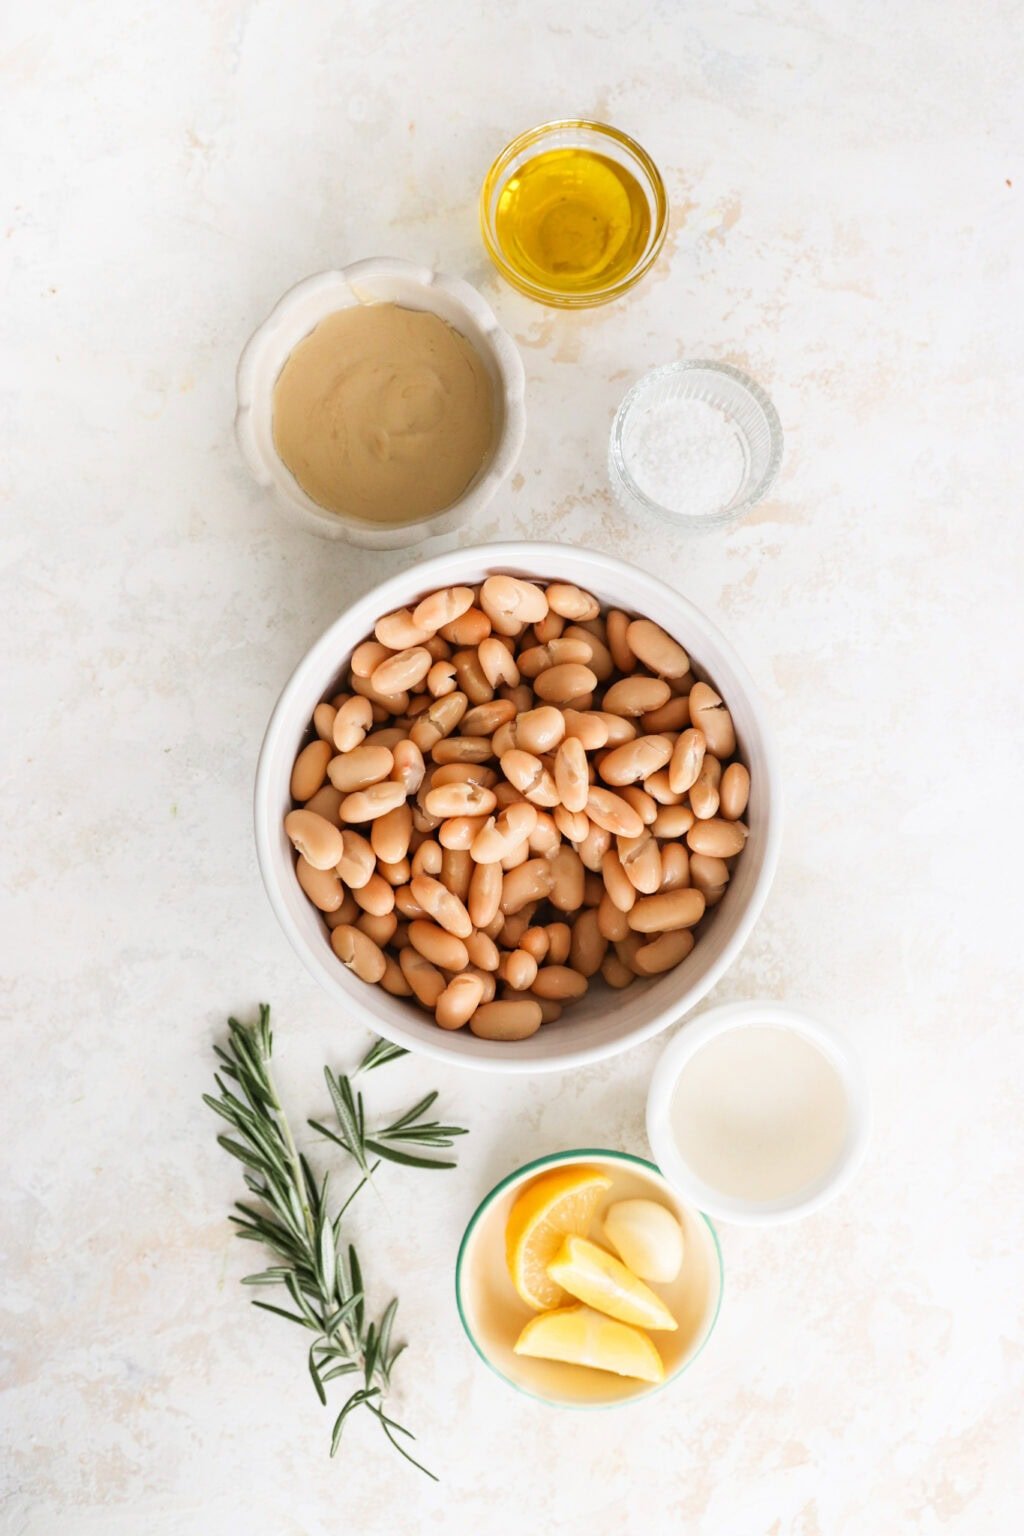 Ingredients for Super Creamy Vegan White Bean Dip with Cashews in small glass bowls, including cannellini beans, cashews, extra virgin olive oil, salt, lemon juice